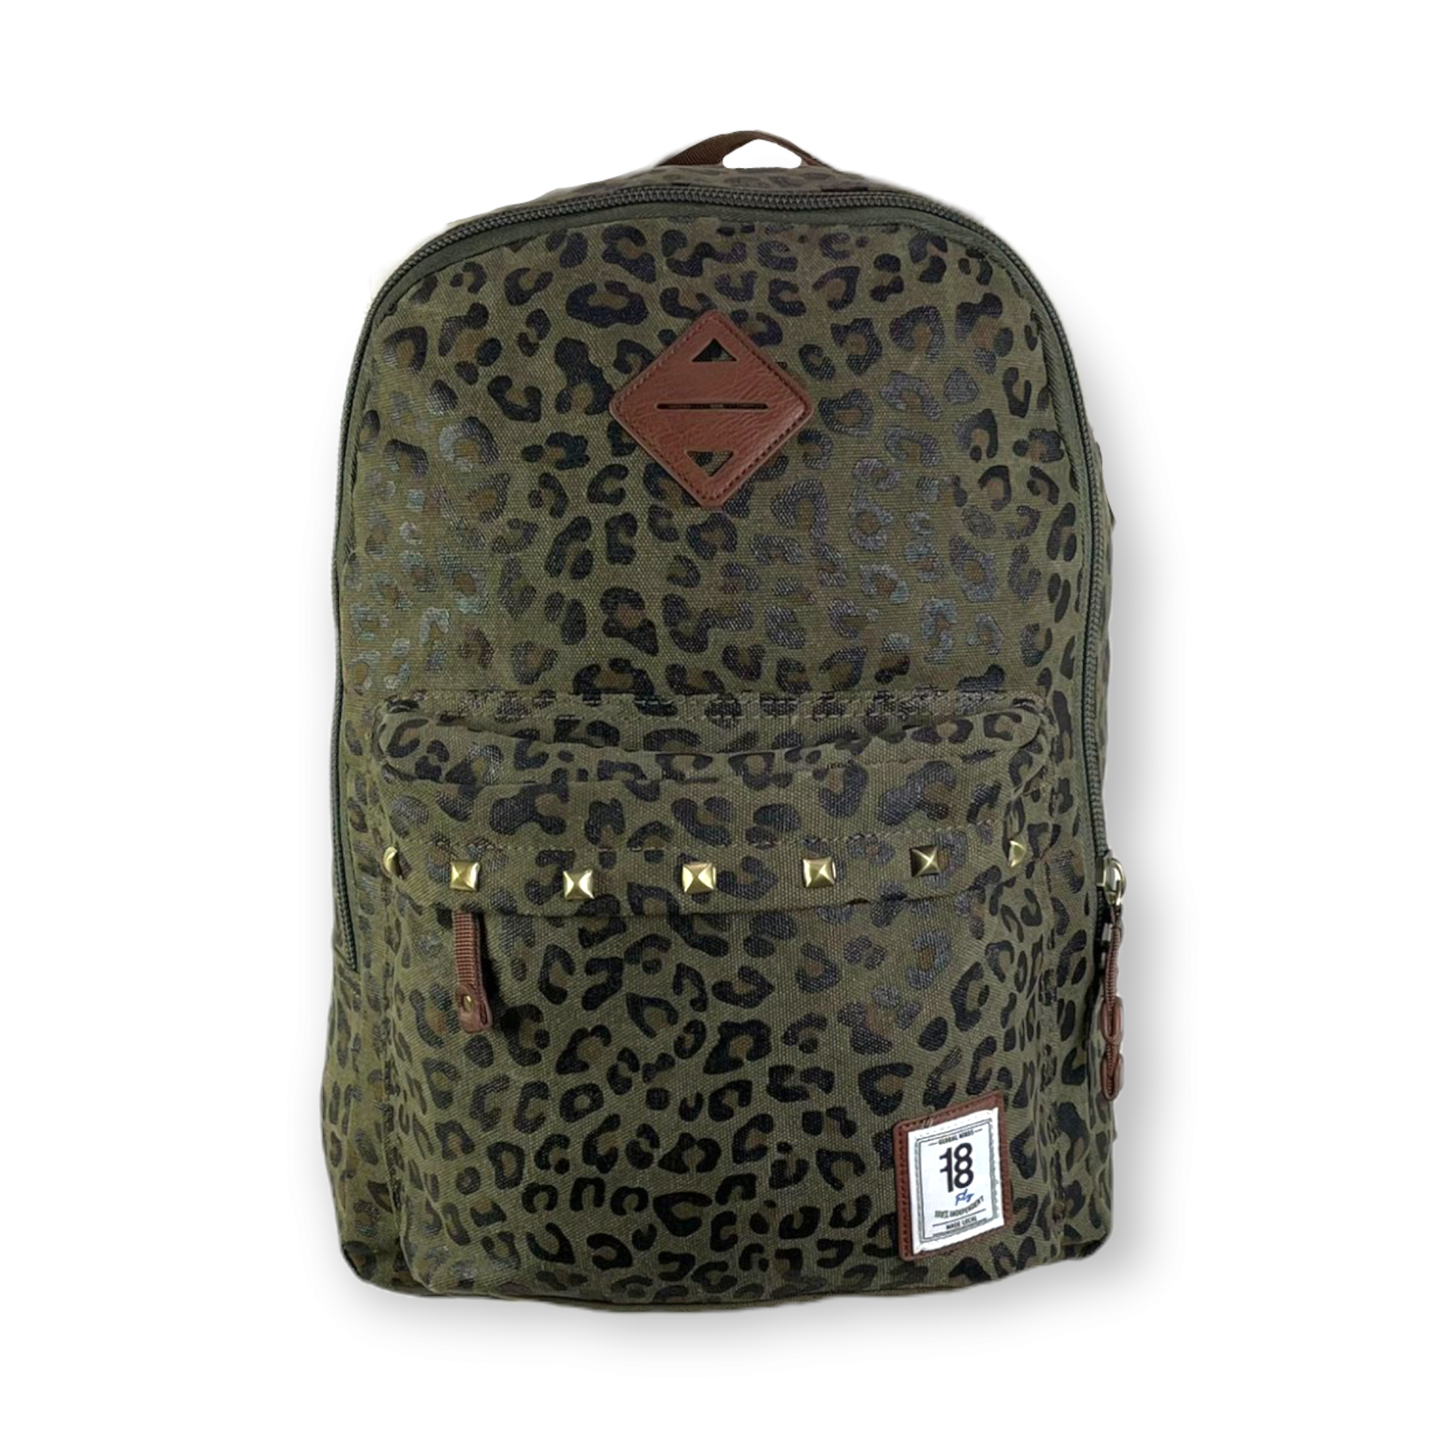 Backpack with Leopard print and studs